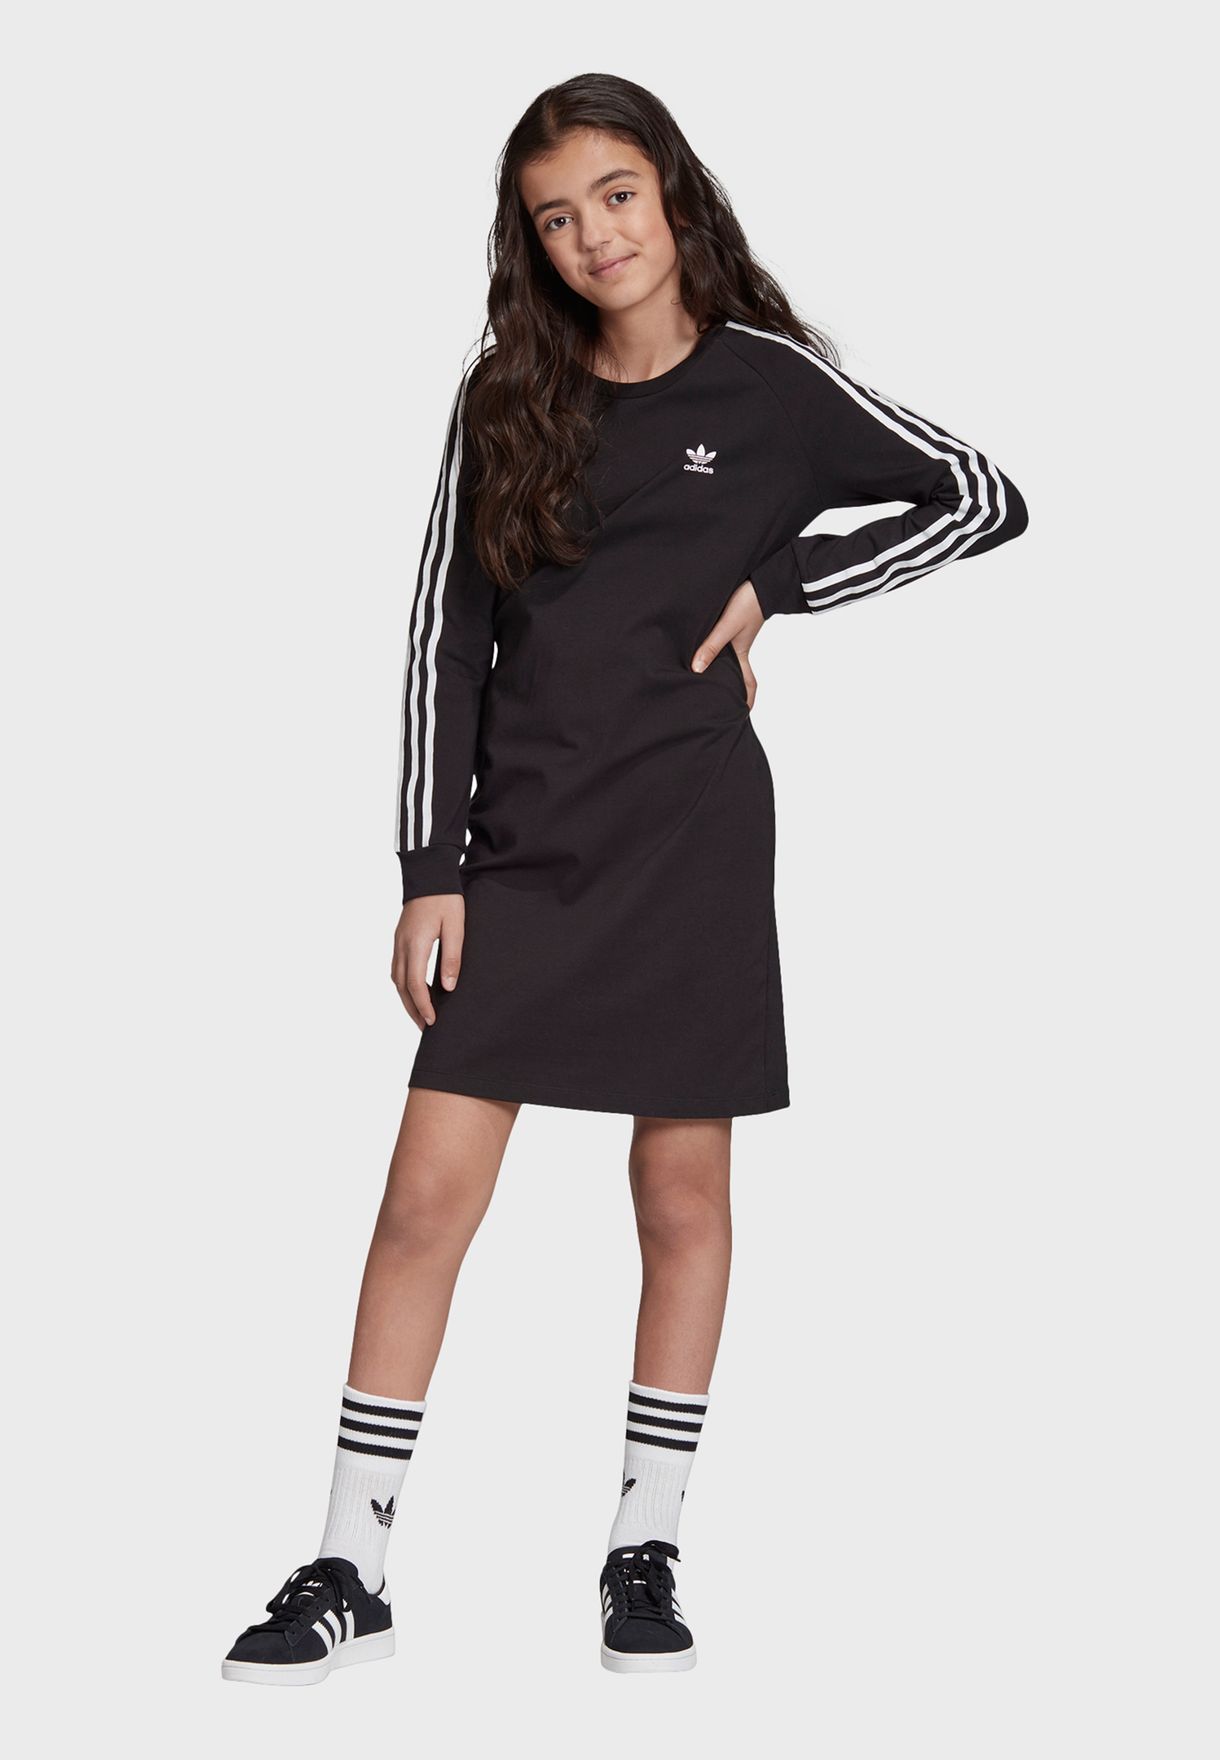 Youth 3 Stripes Dress for Kids 